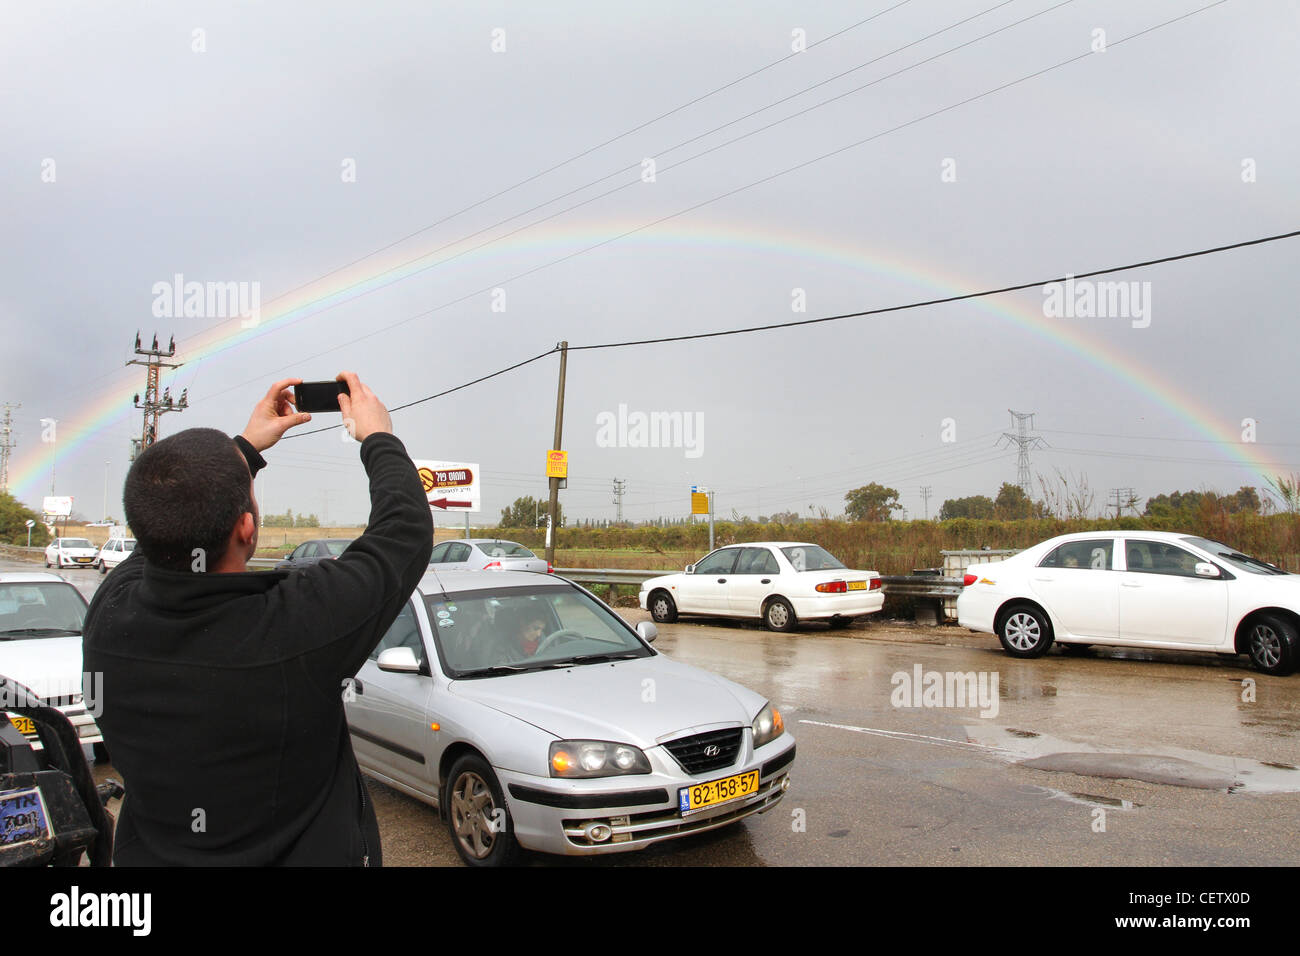 Cars pull over while the drivers look and photograph a full arc rainbow. Photographed in Israel Stock Photo